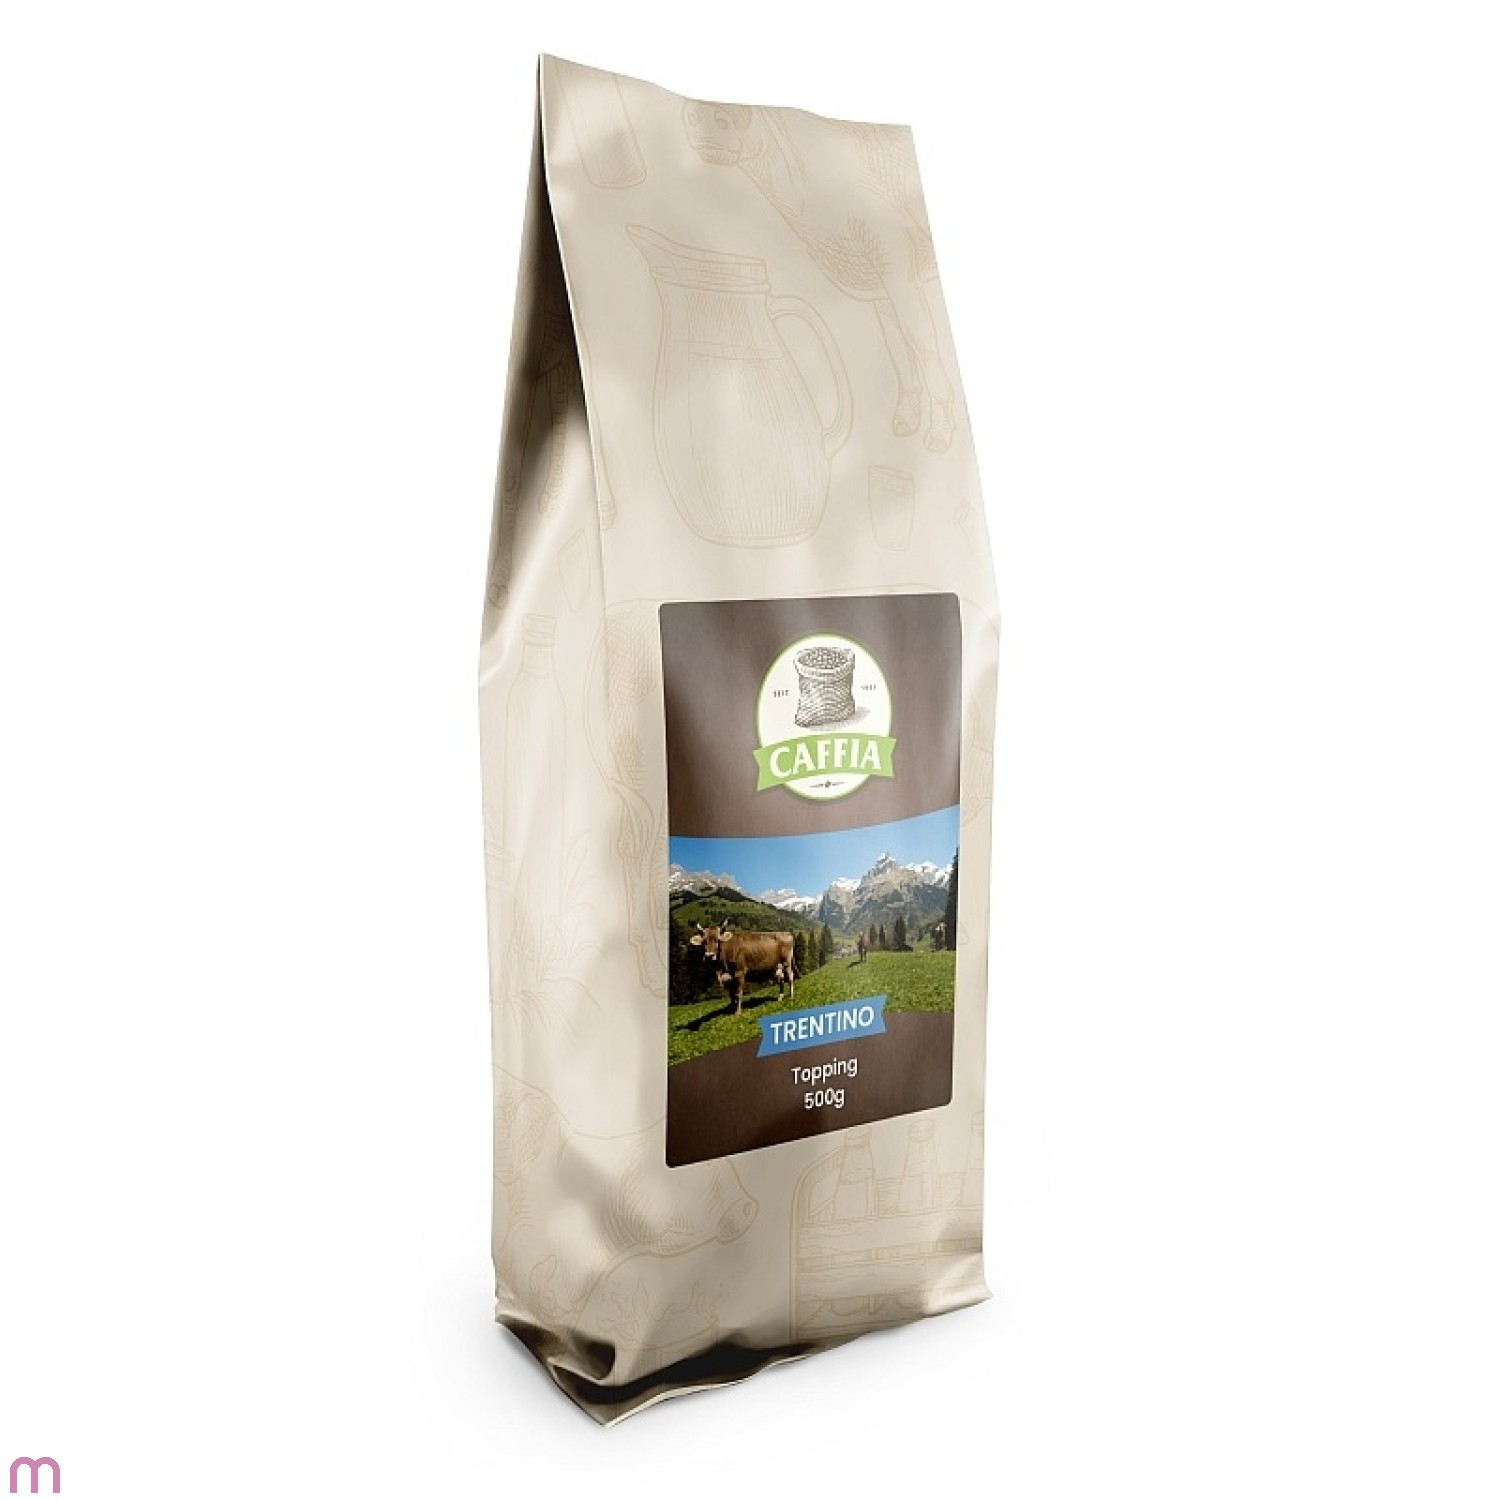 Caffia Trentino Topping 500g granuliertes Milchtopping